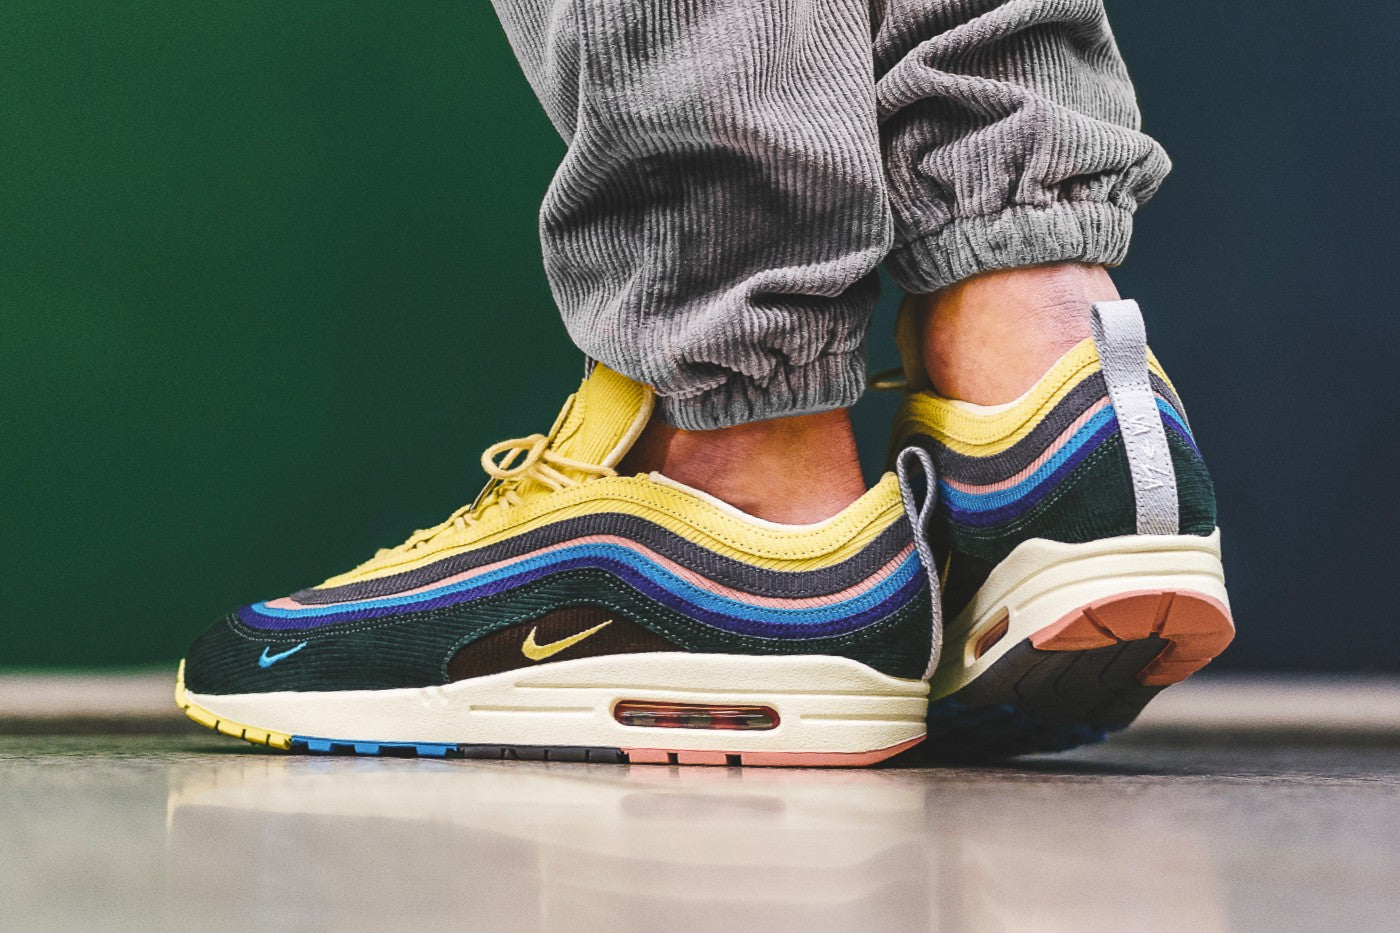 Air Max Day 2023: The Hottest Nike Air Max Sneakers at The Edit LDN